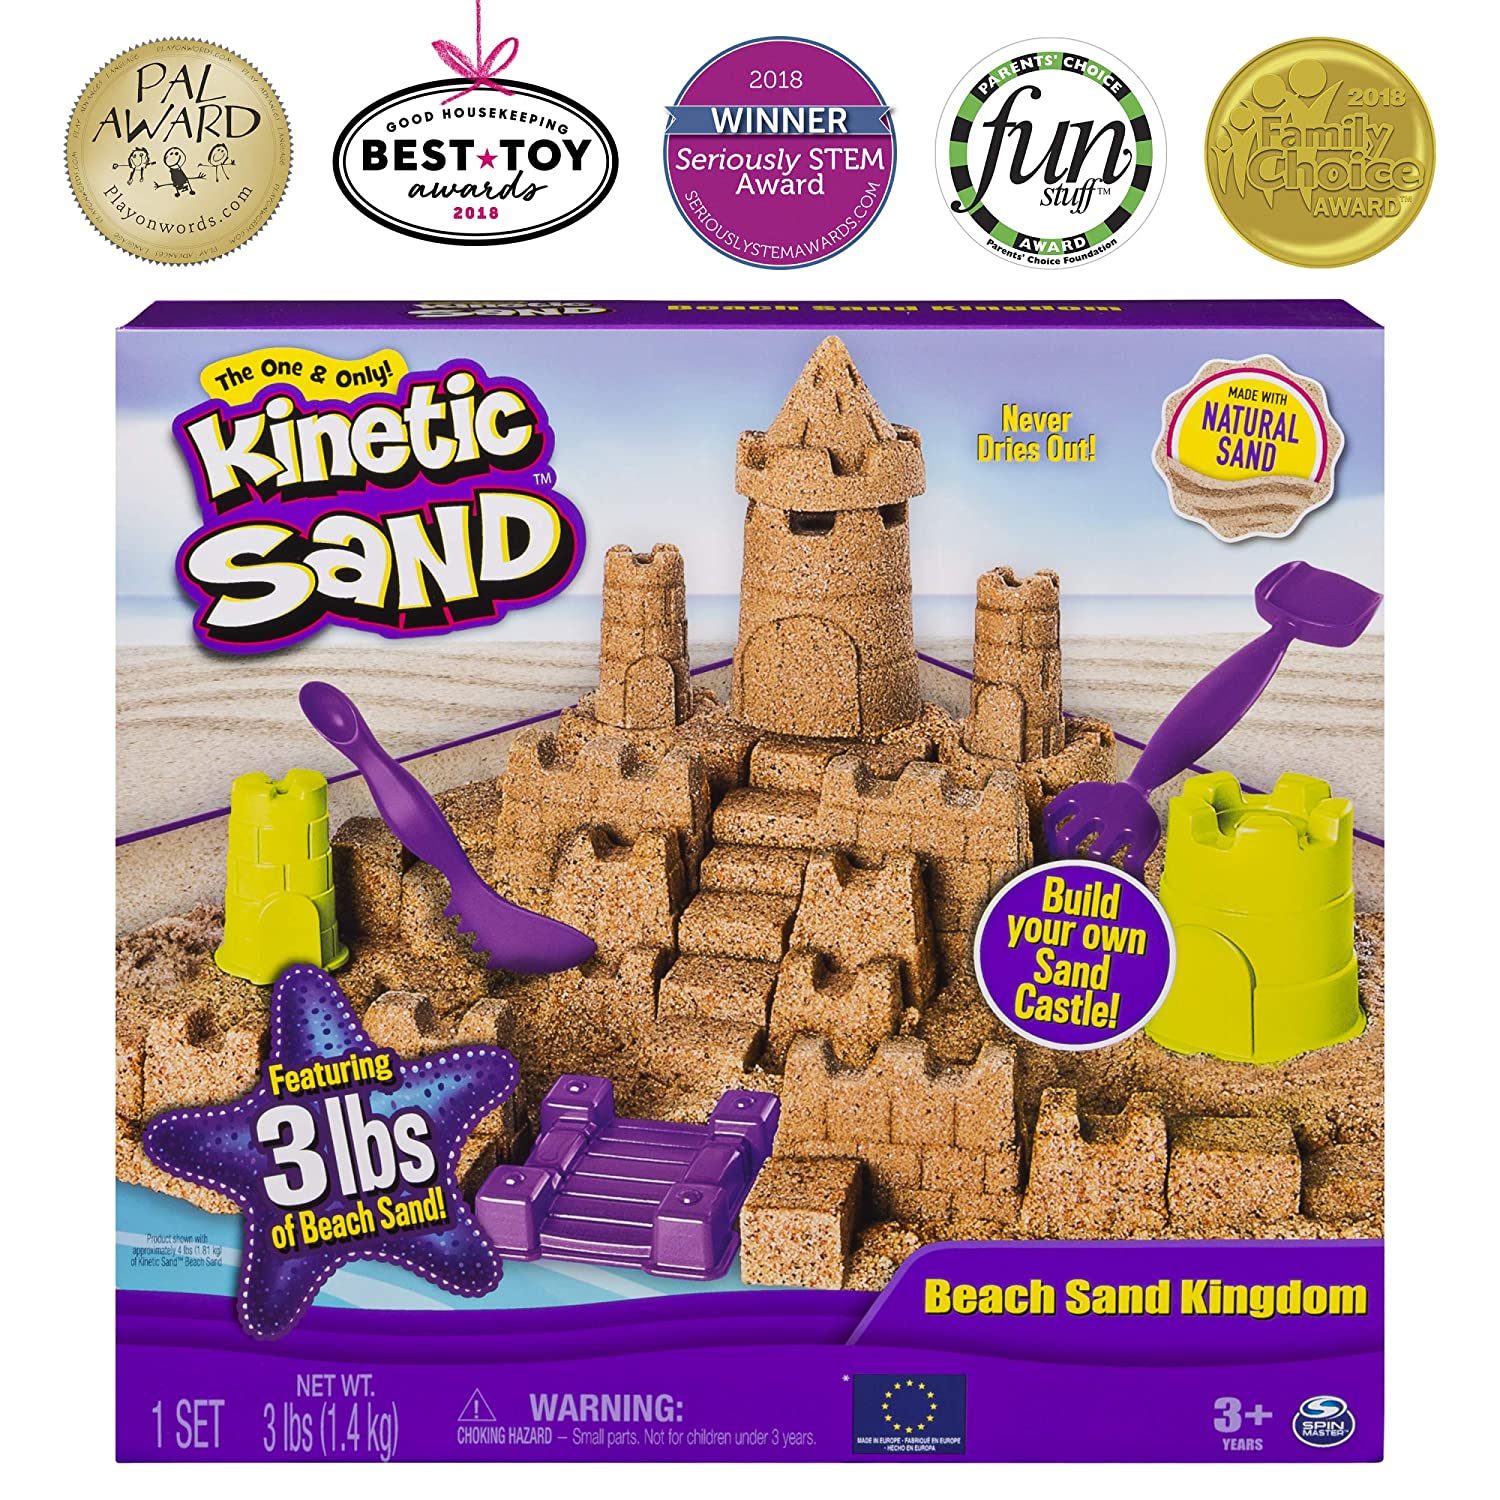 Kinetic Sand Beach Sand Kingdom Playset with 3lbs of Beach Sand, for Ages 3 and Up